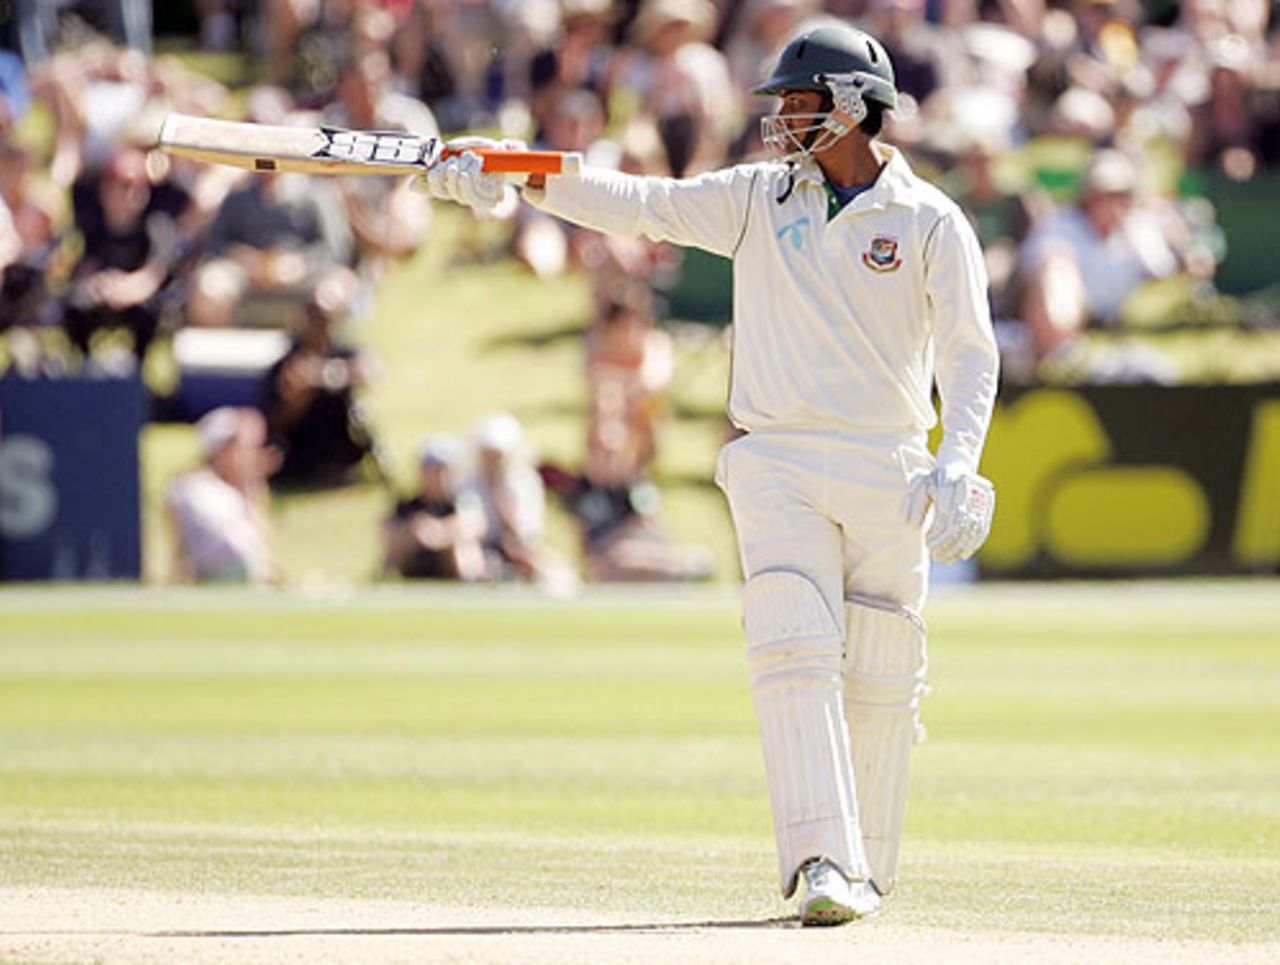 Tamim Iqbal notched up a second fifty on Test debut, New Zealand v Bangladesh, 1st Test, Dunedin, 2nd day, January 5, 2008